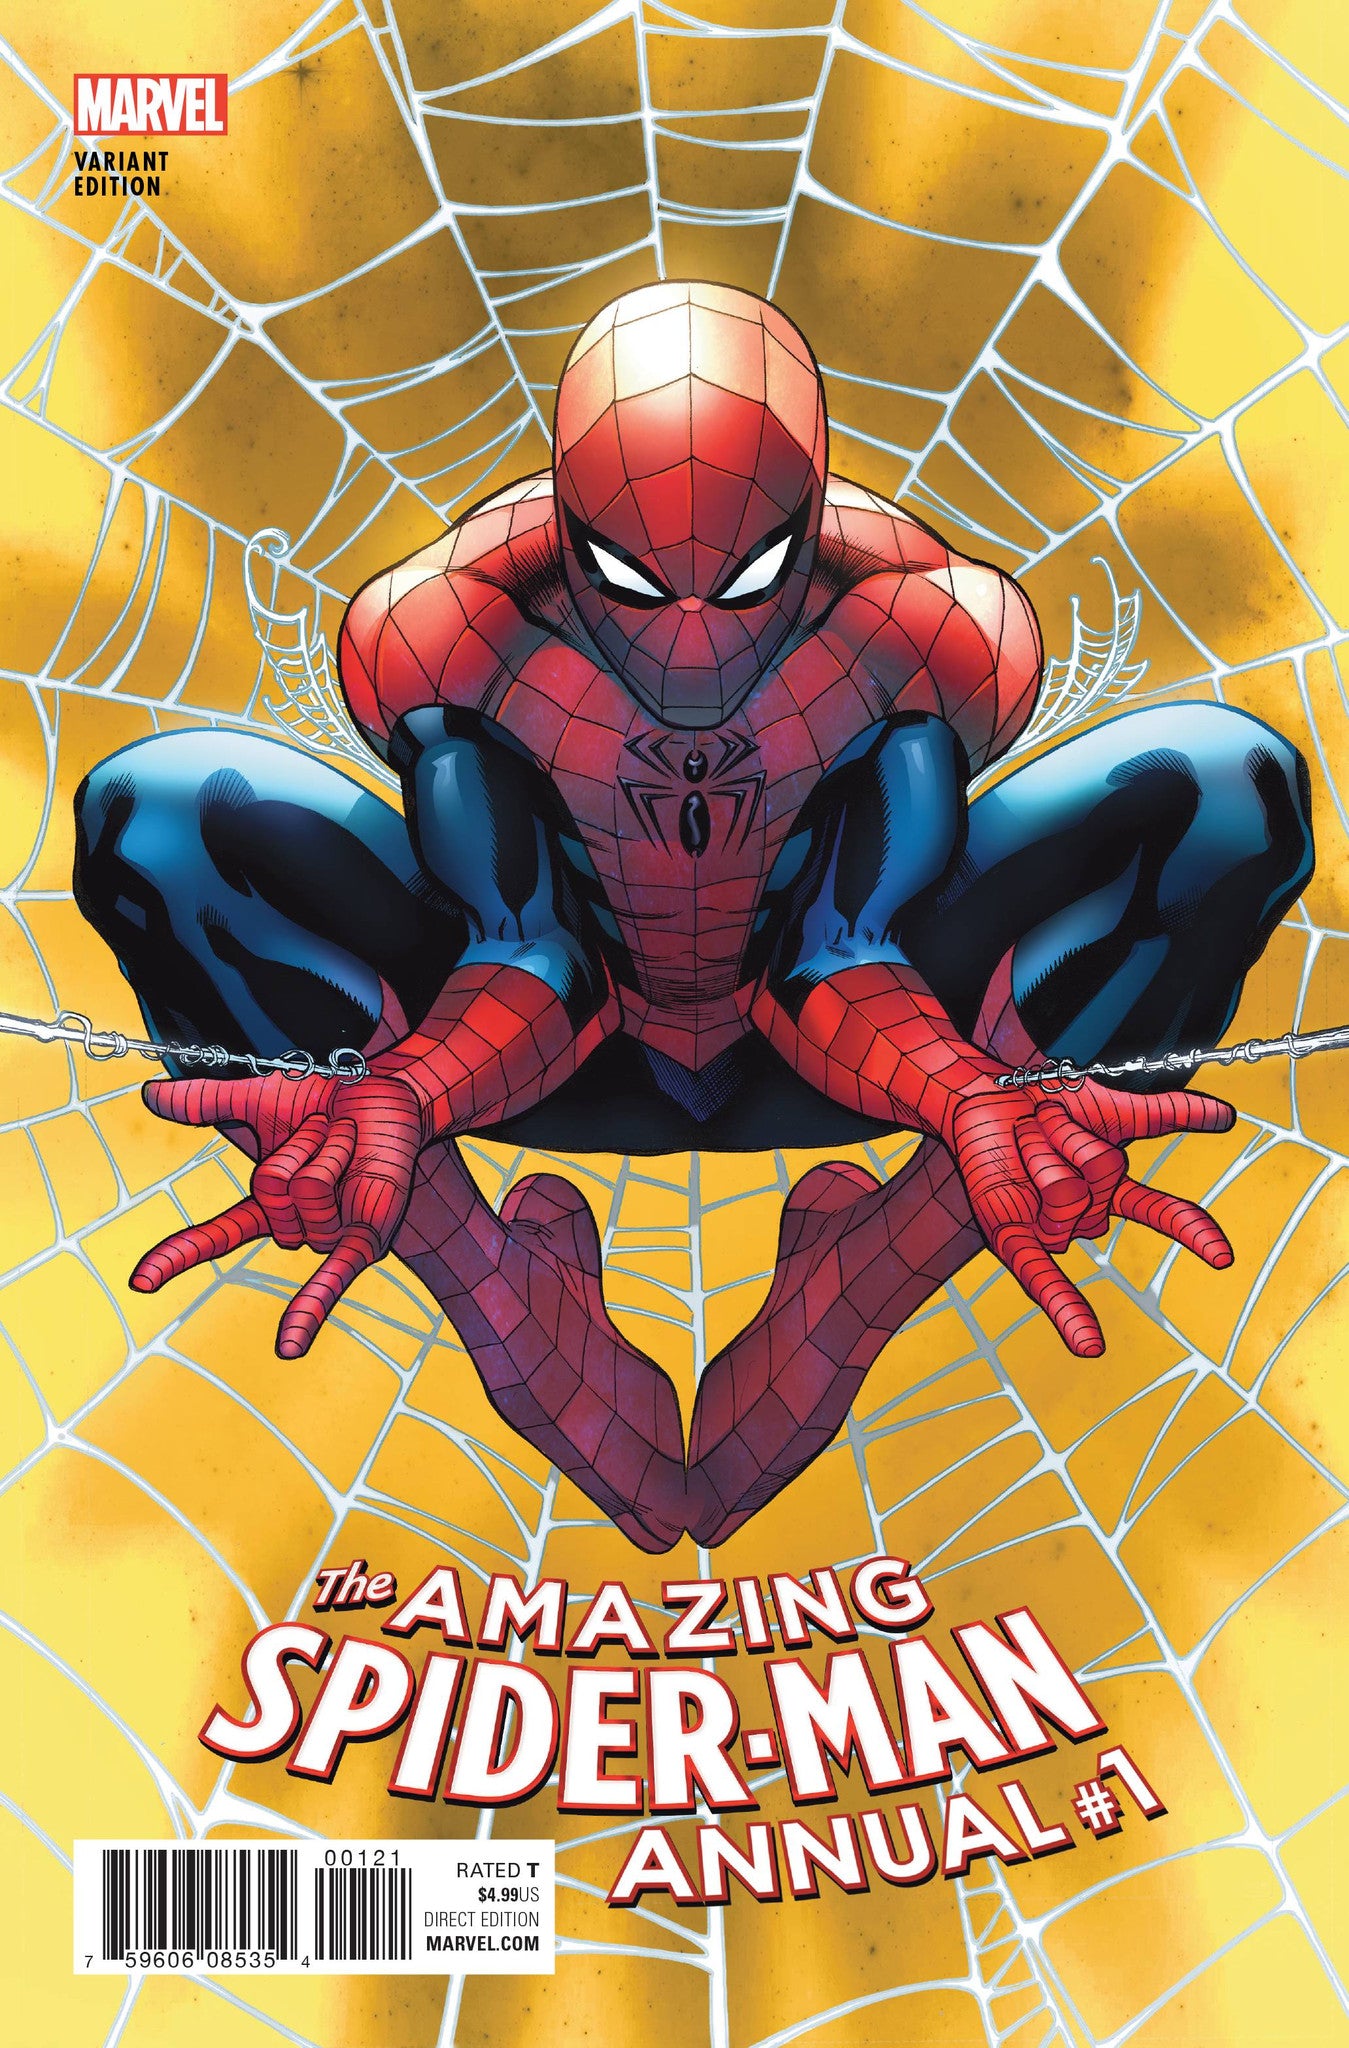 AMAZING SPIDER-MAN ANNUAL #1 MCGUINNESS VAR COVER